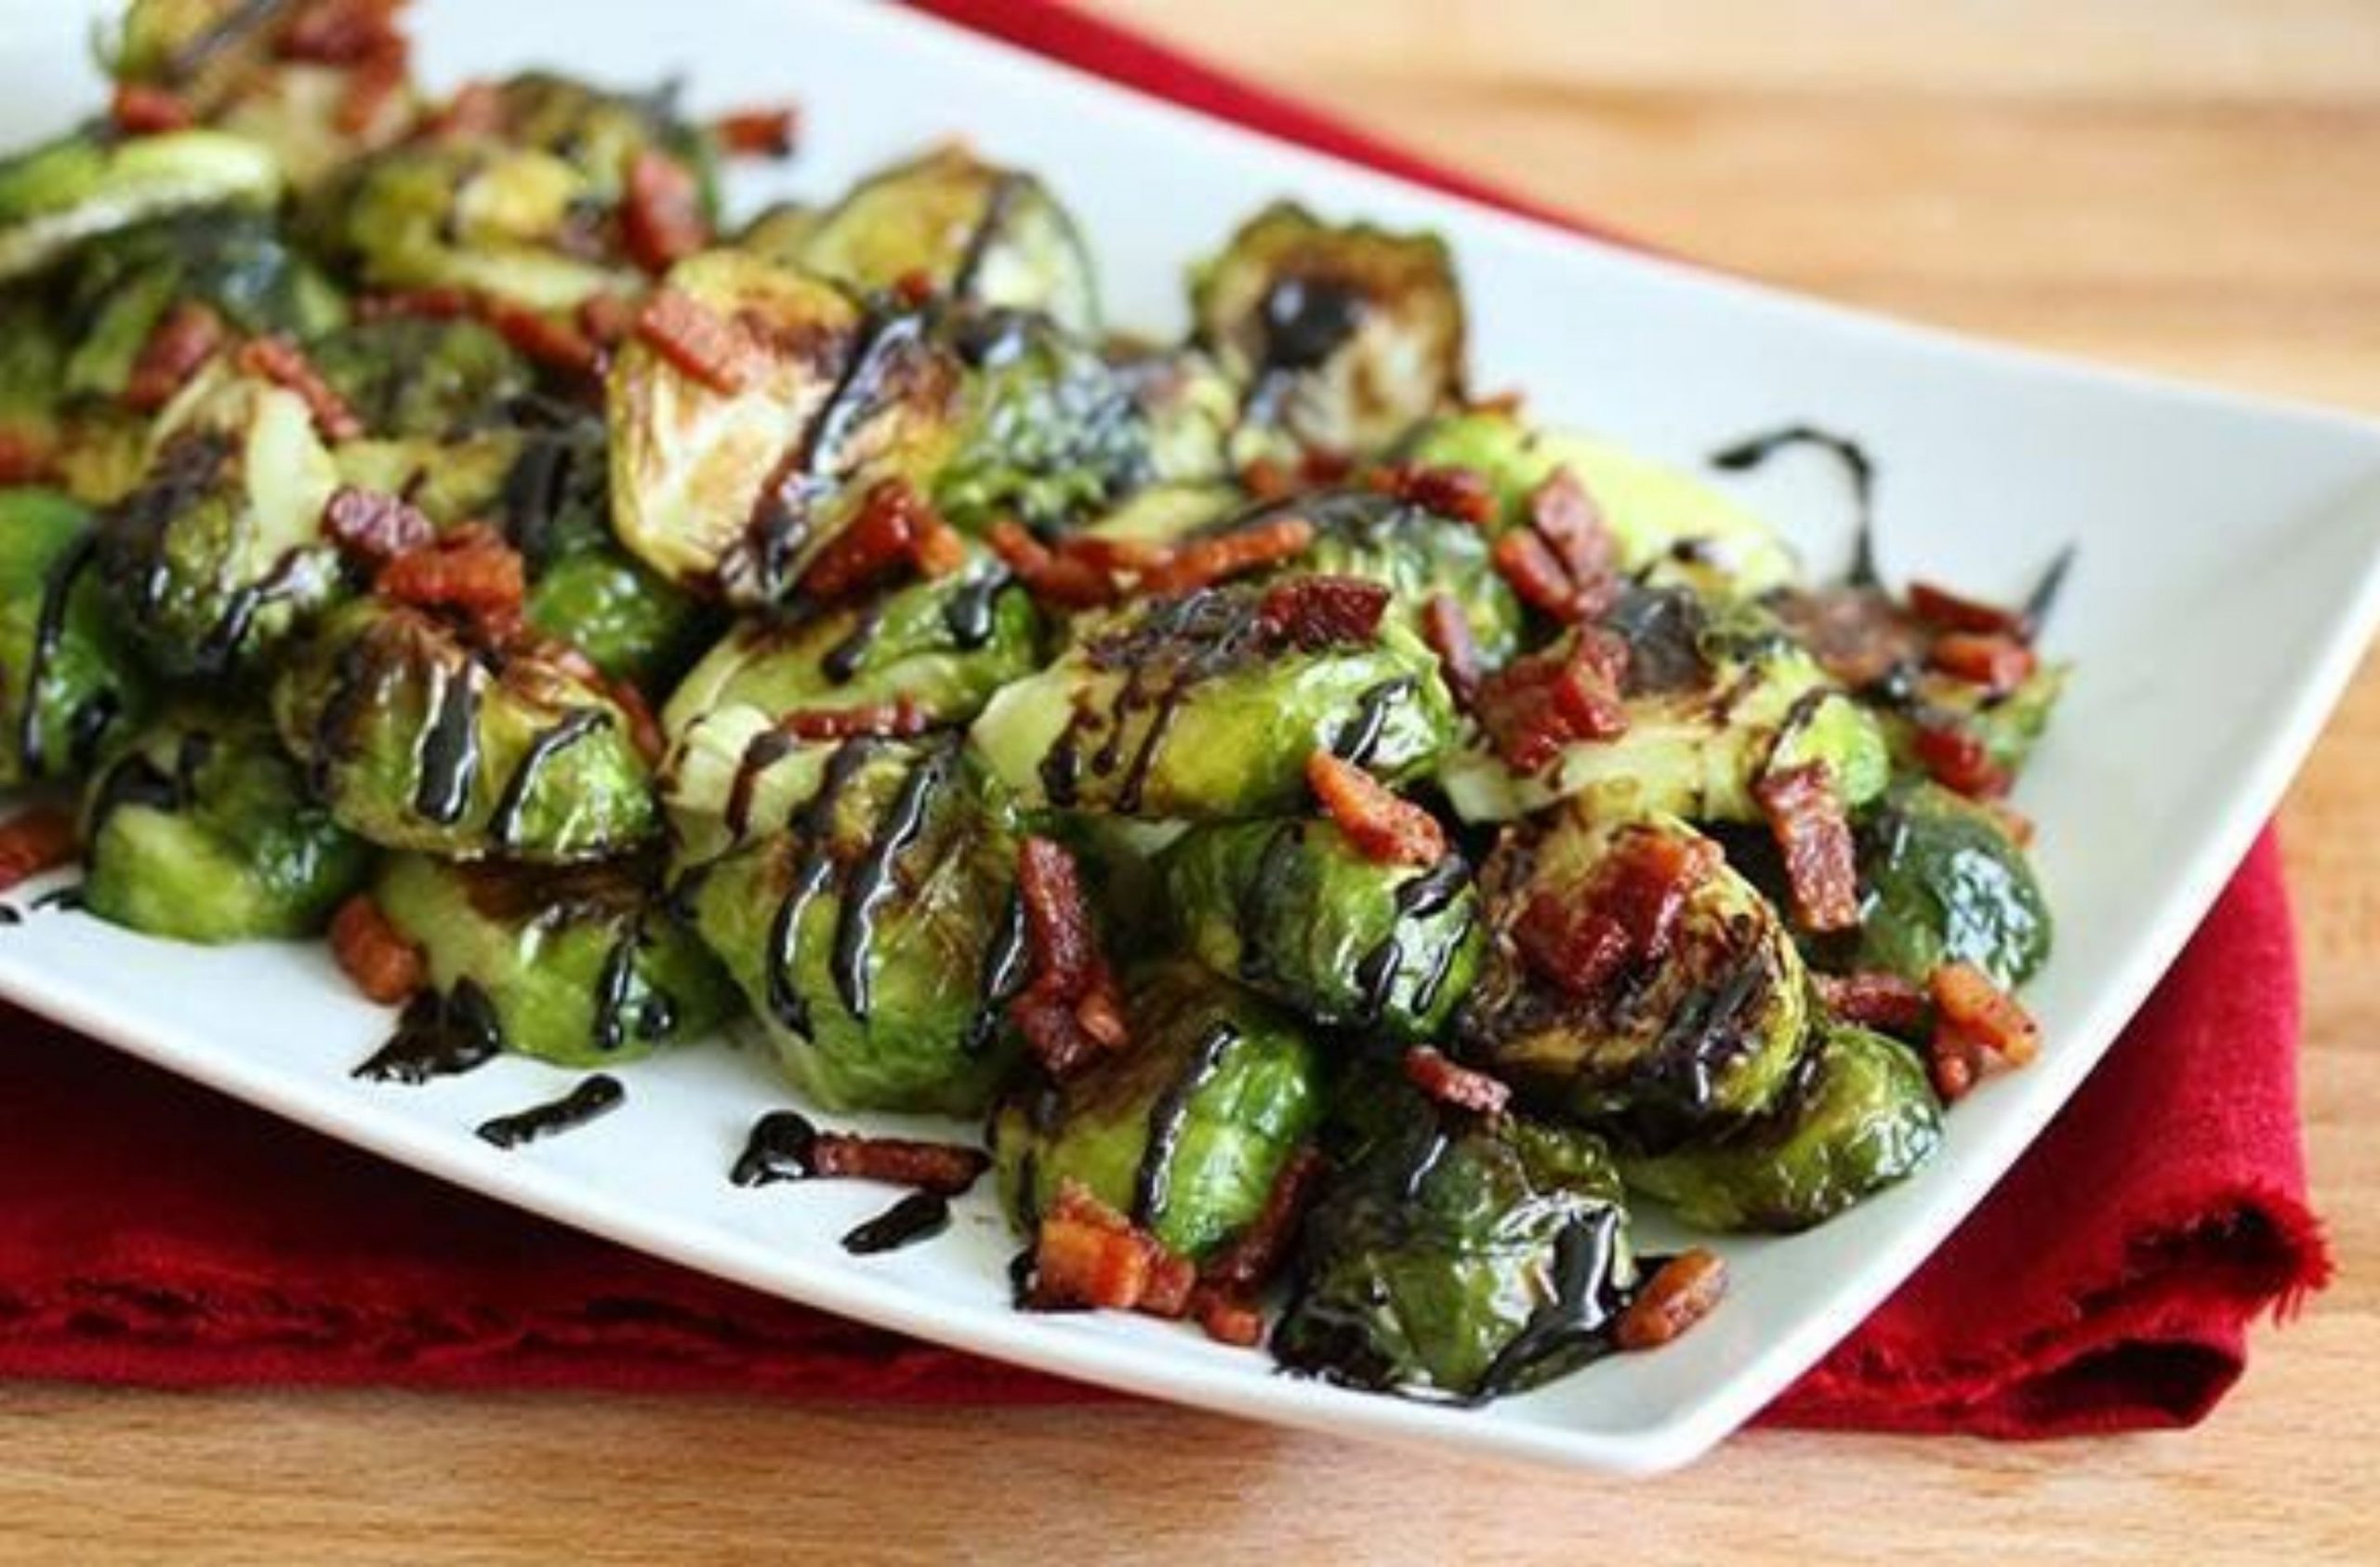 Grilled Brussel sprouts with Bacon